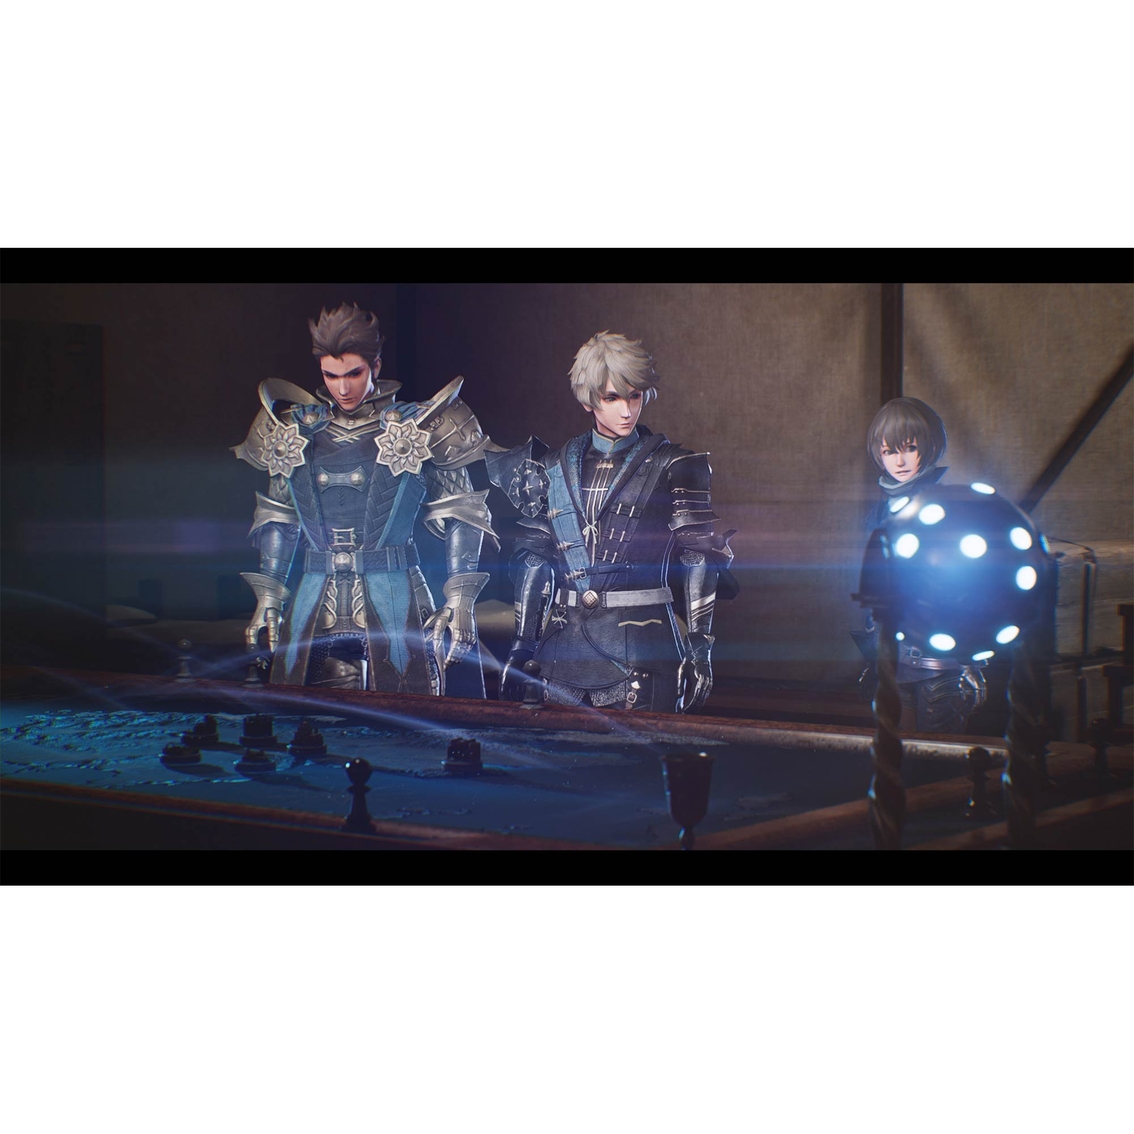 The DioField Chronicle (Nintendo Switch) - Image 3 of 6